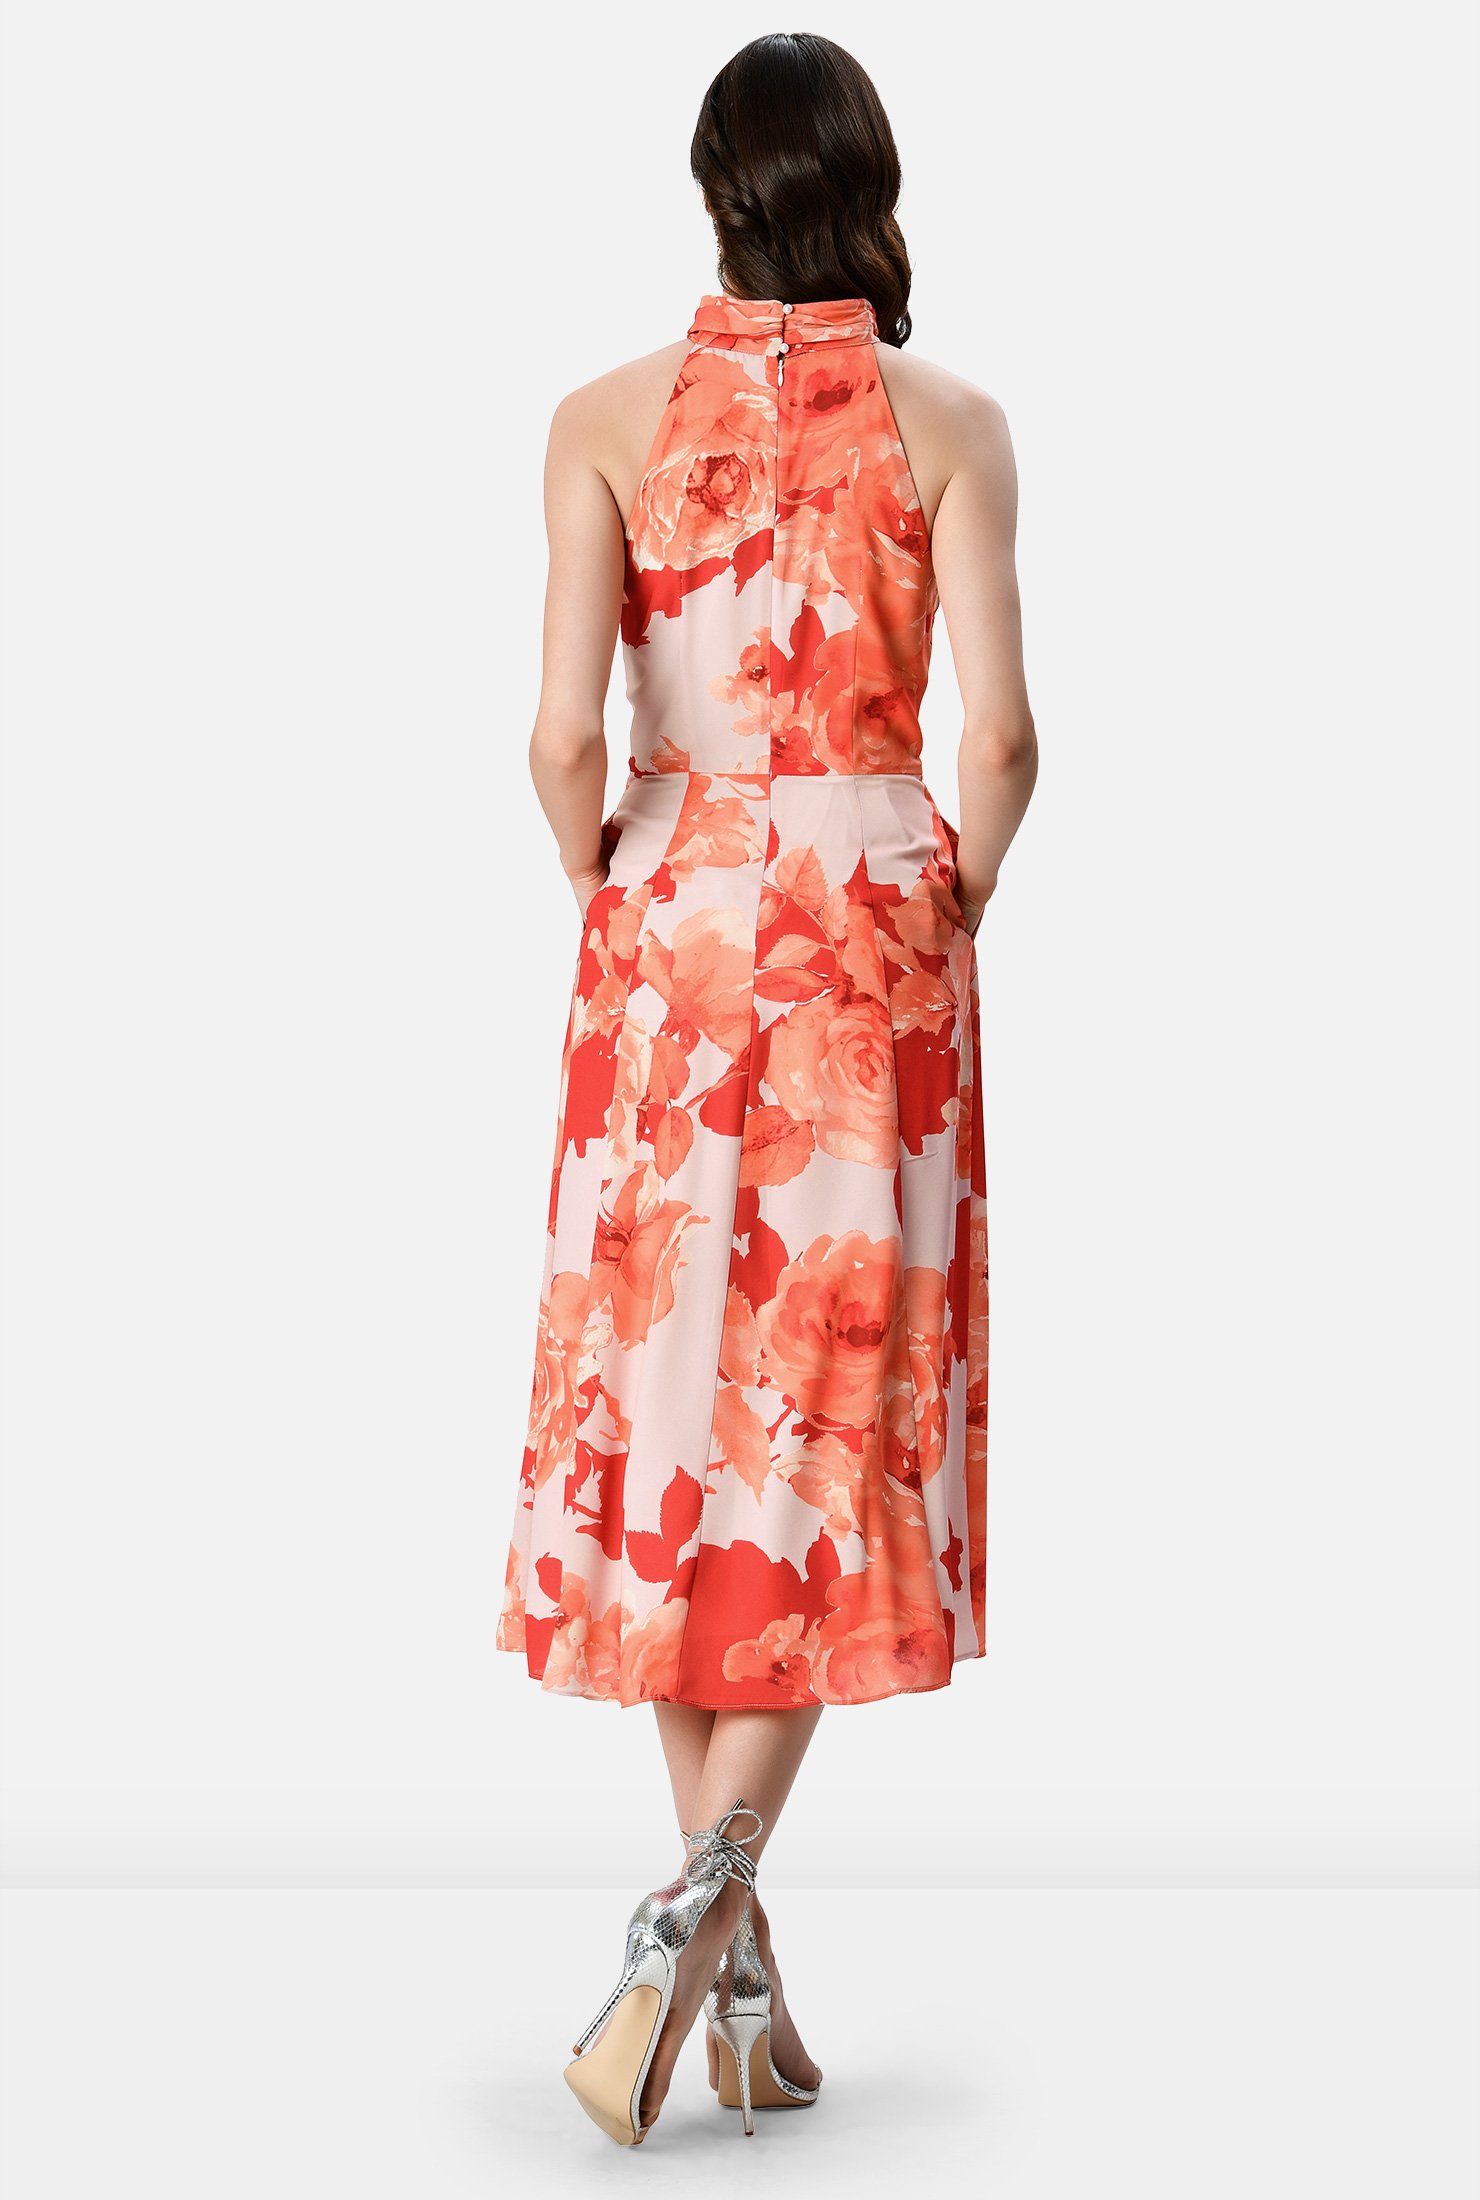 Golden hour favorite! Feel the breeze and the sun on your shoulders in our rose print crepe dress with a halter neck and a crossed front waist atop a full flare skirt that makes it a perfect choice for an unforgettable party.